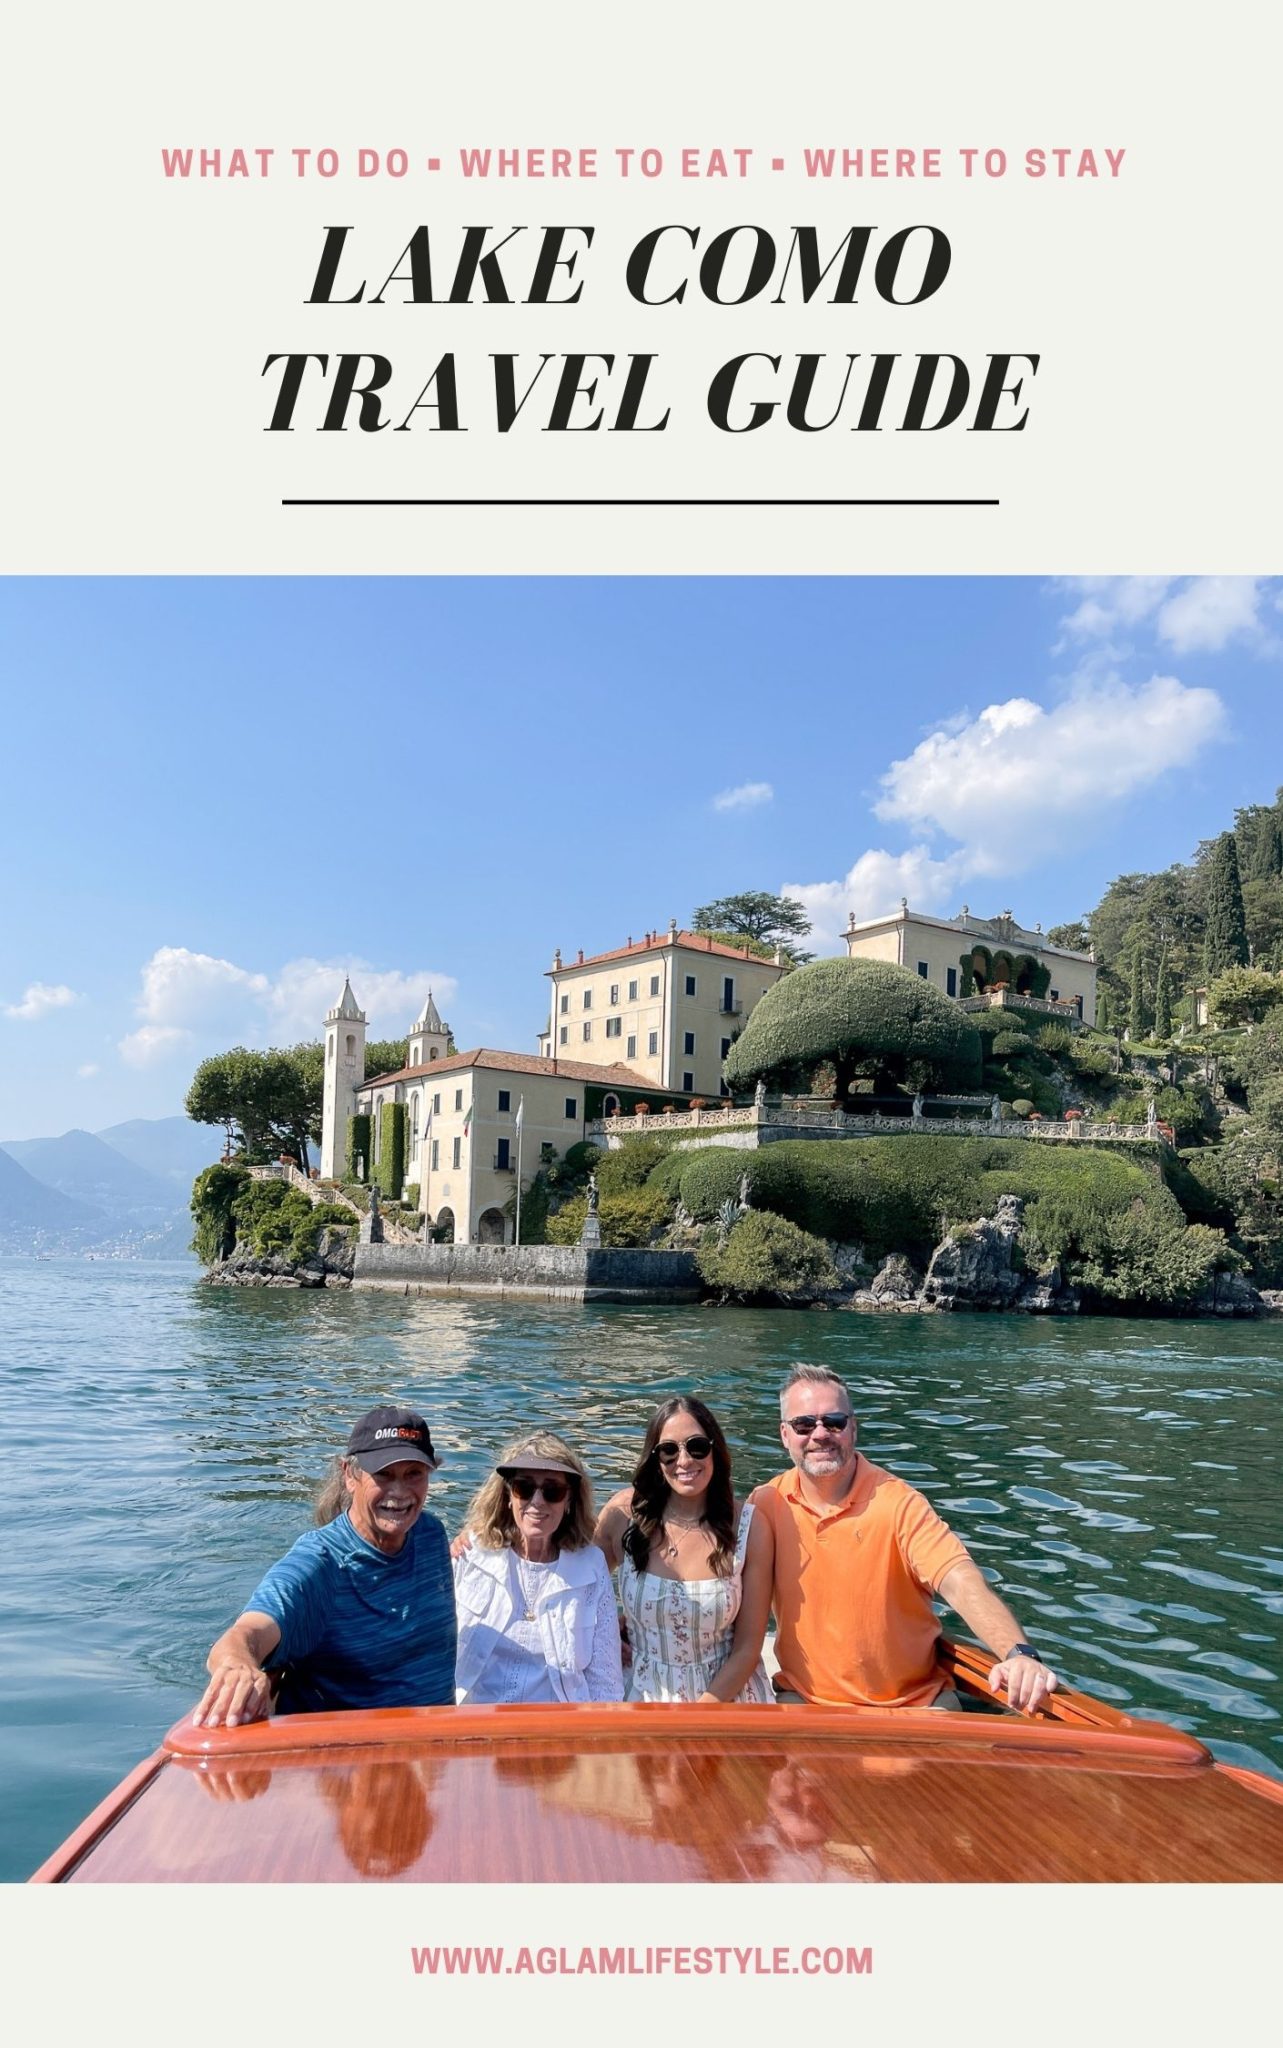 people riding a boat for Lake Como travel guide